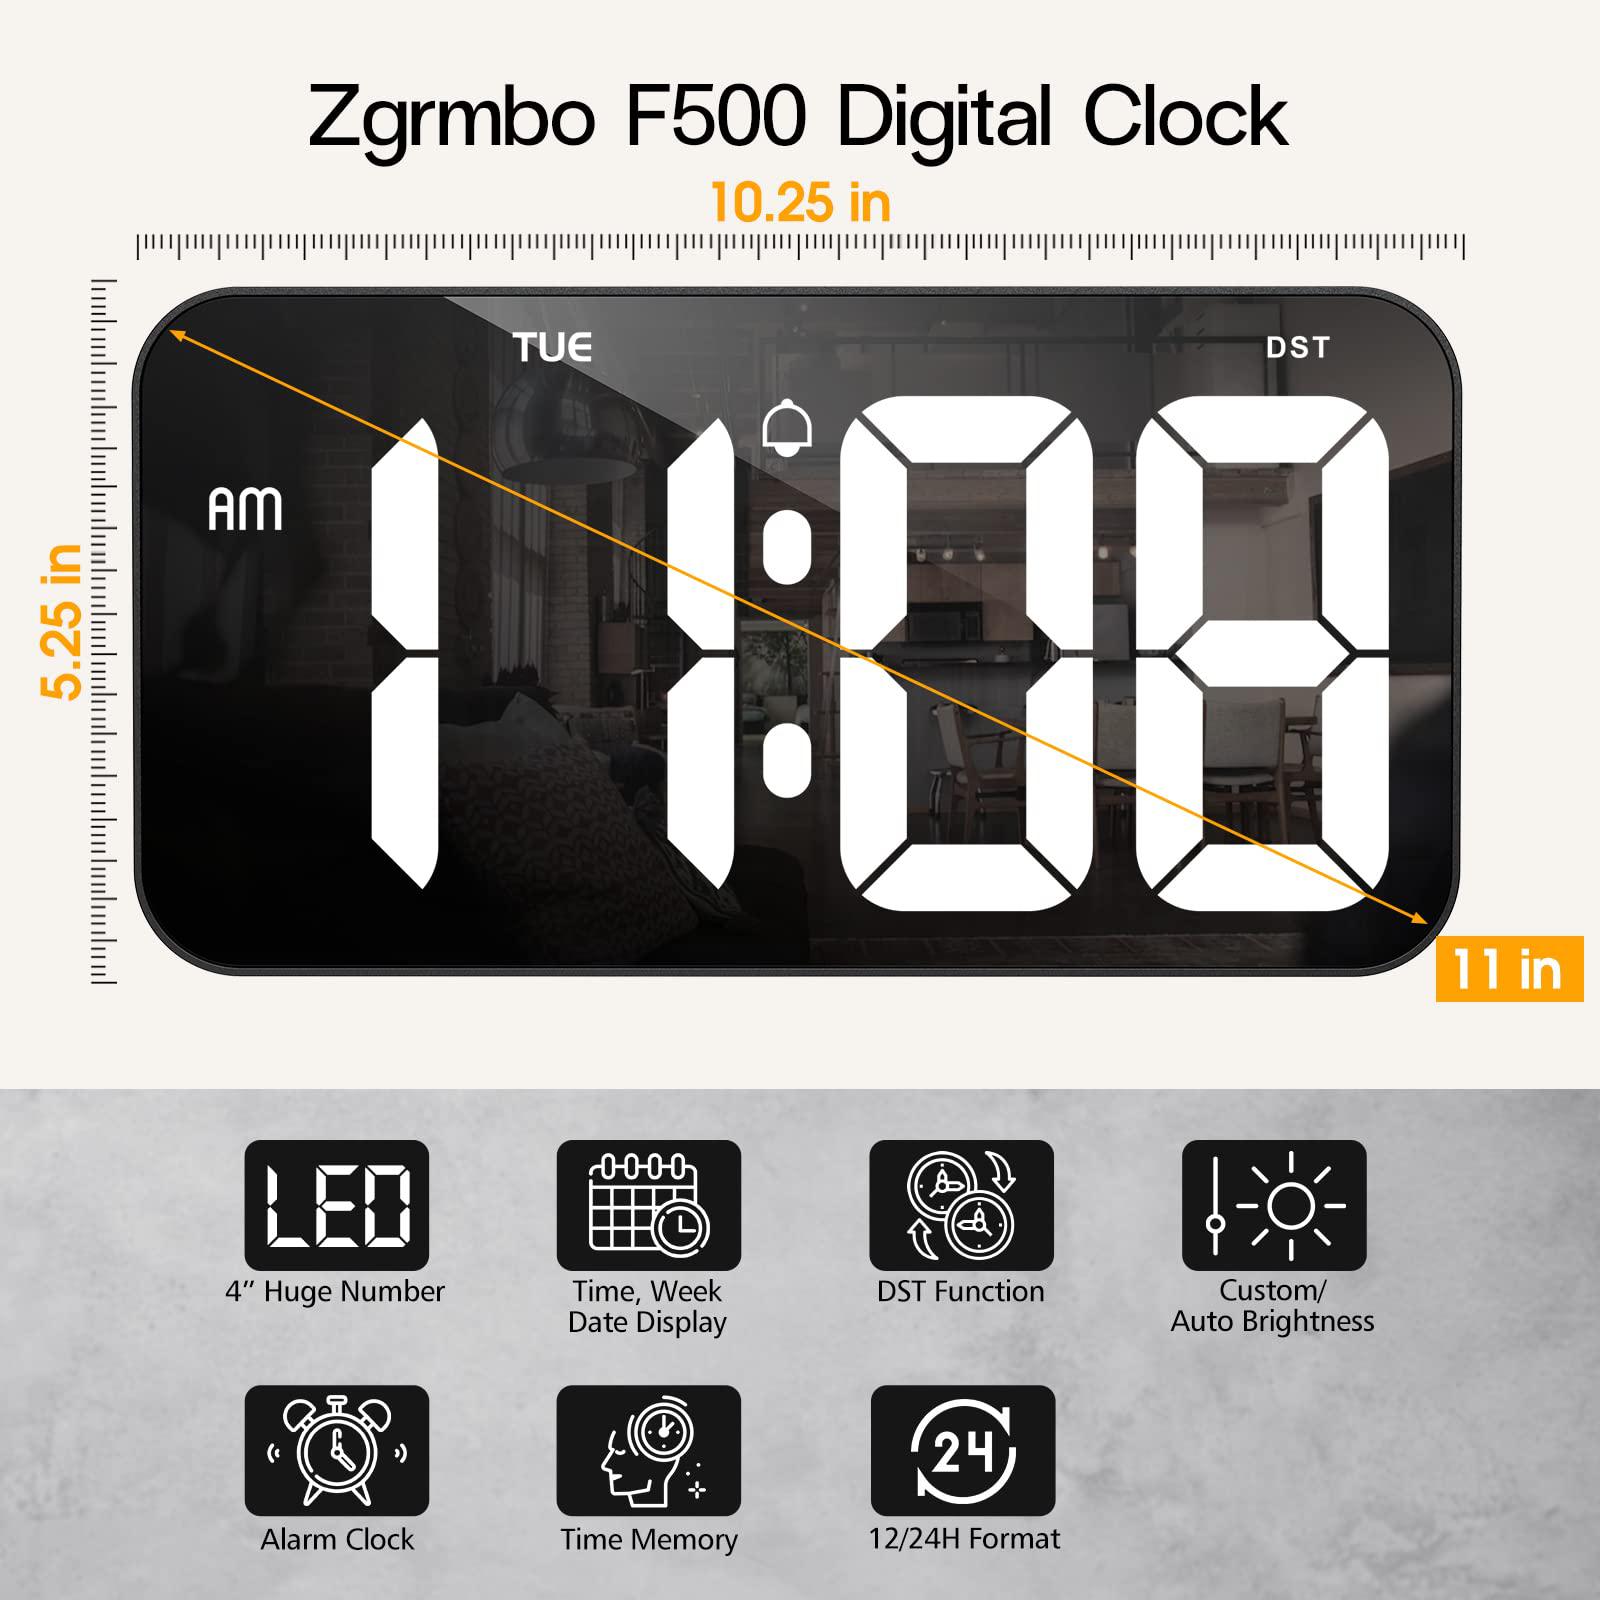 zgrmbo large digital wall clock with 4" huge clear digits - digital clock for wall with daylight saving time, auto-dimming, w